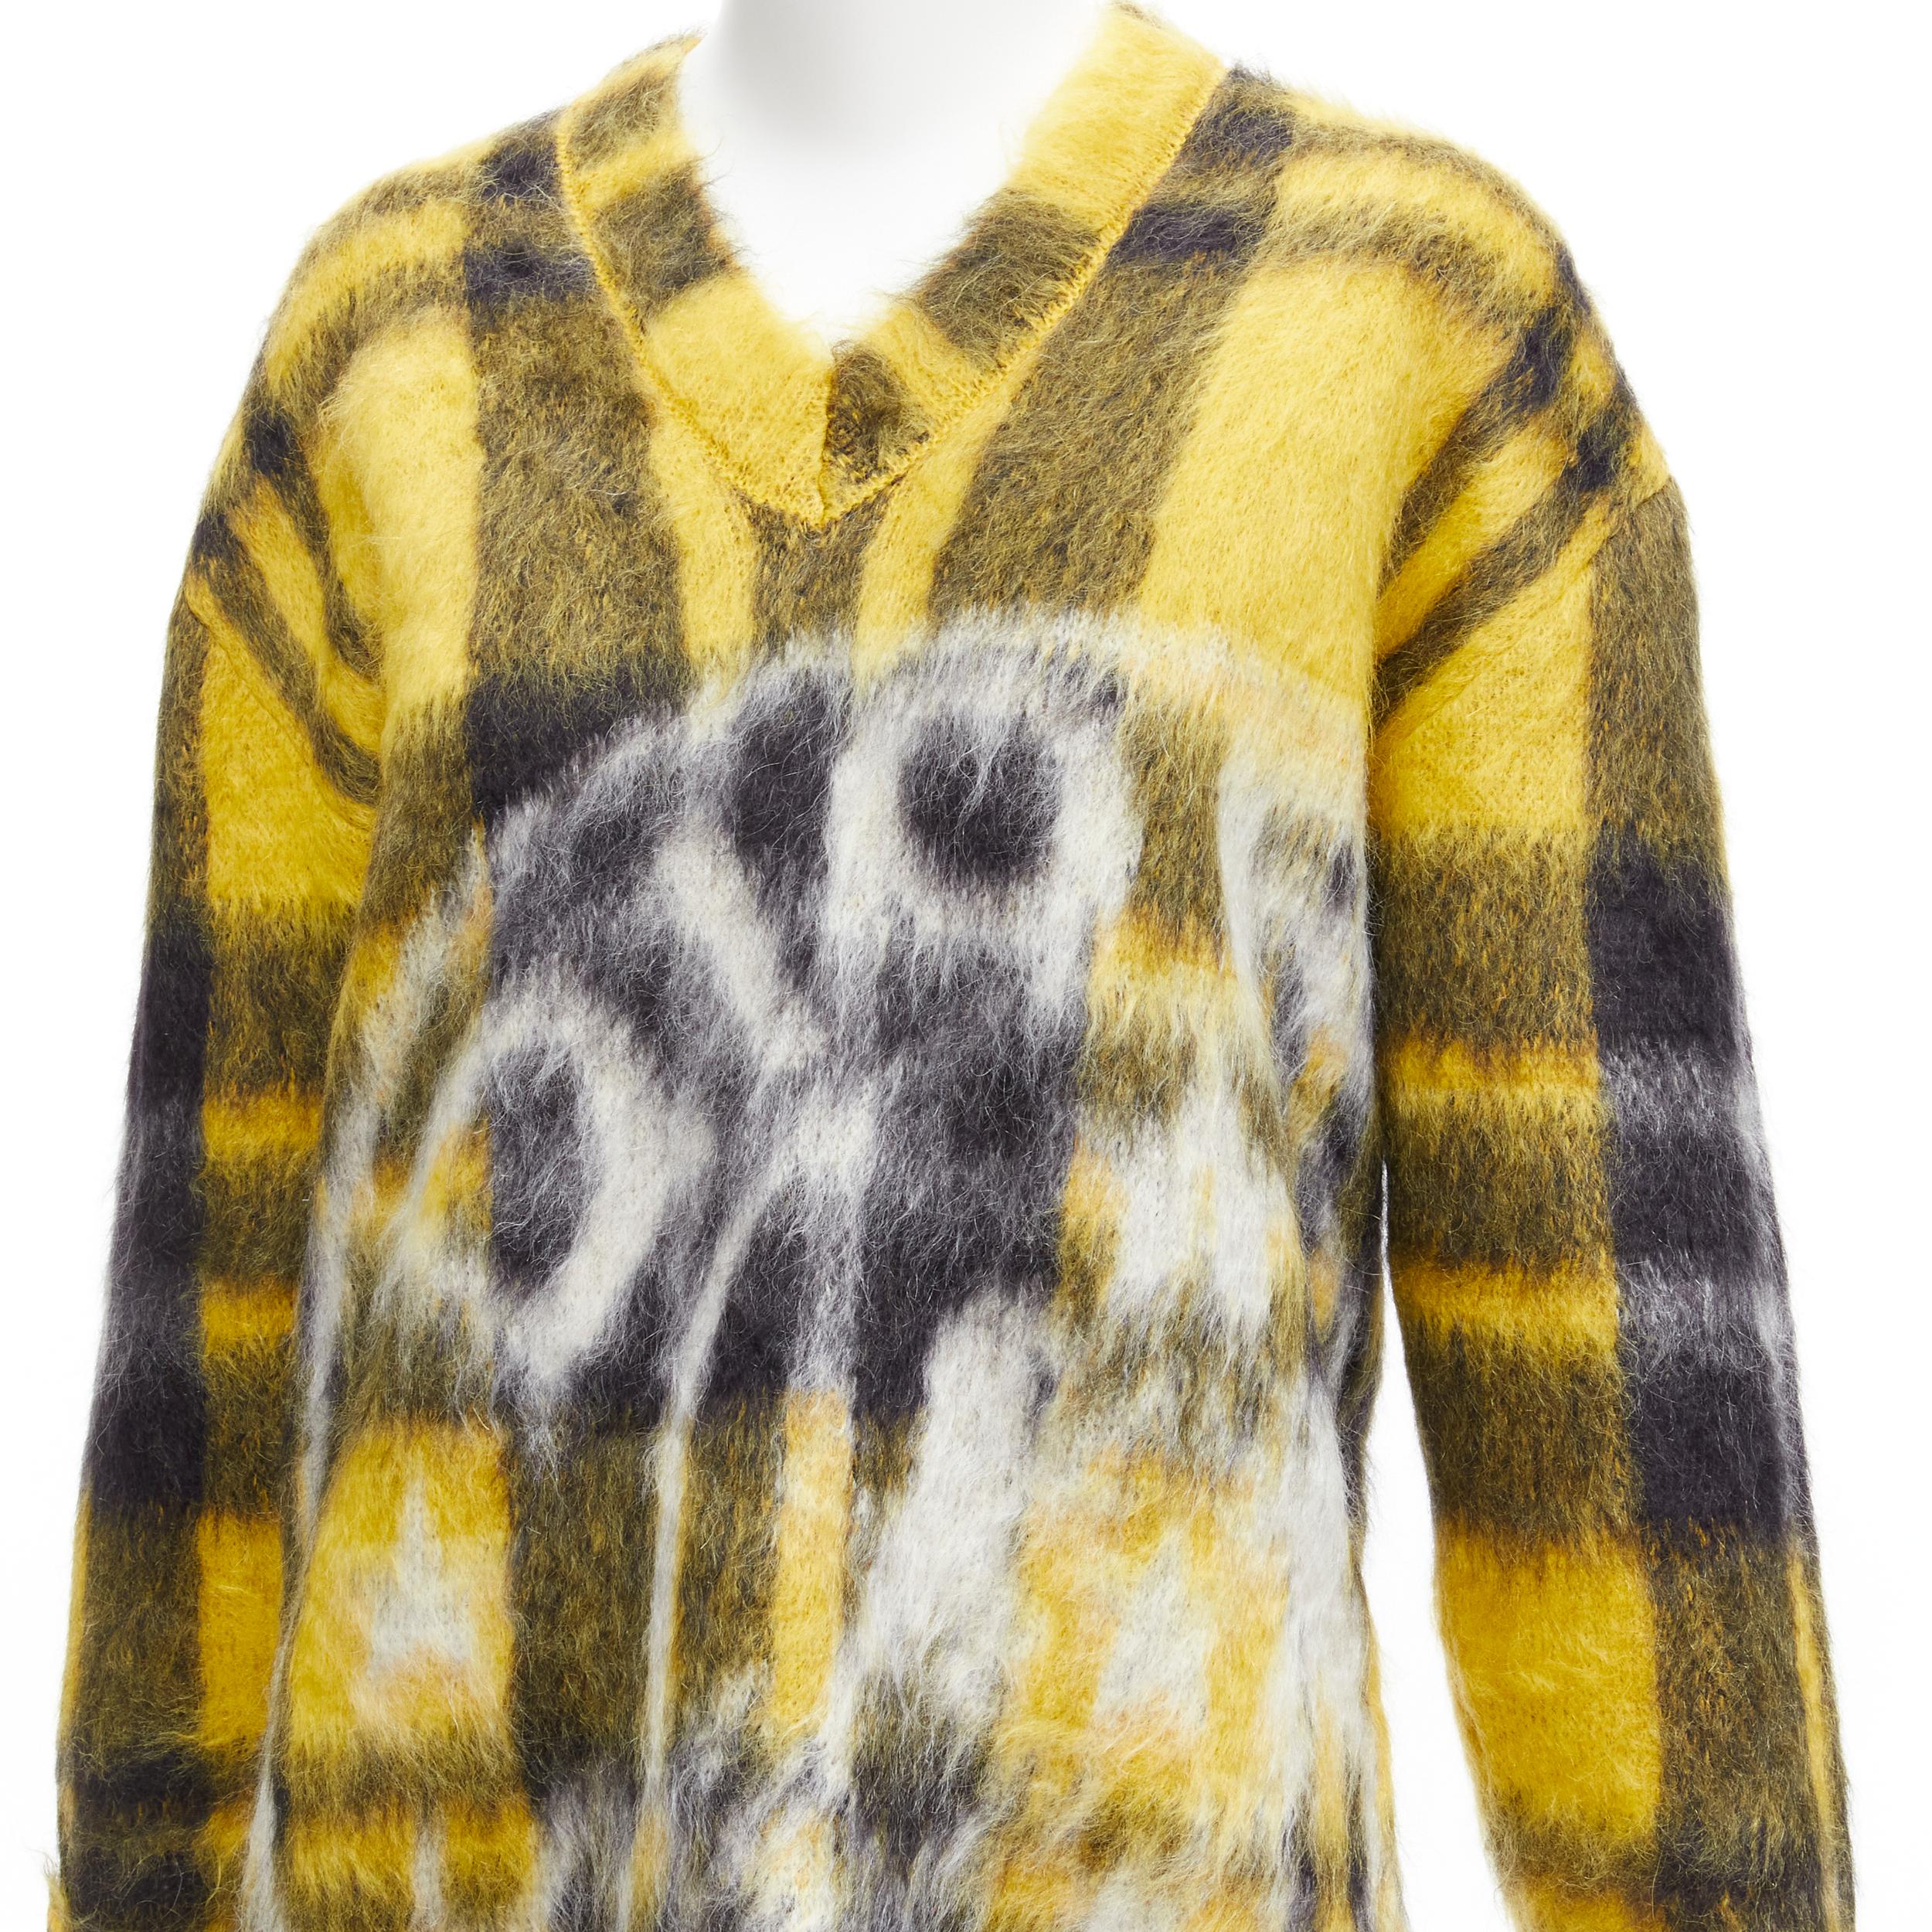 CHRISTIAN DIOR 2022 Runway stamp print yellow plaid mohair blend fluffy sweater FR34 XS
Reference: AAWC/A00472
Brand: Christian Dior
Designer: Maria Grazia Chiuri
Collection: PreFall 2022 - Runway
Material: Mohair, Blend
Color: Yellow,